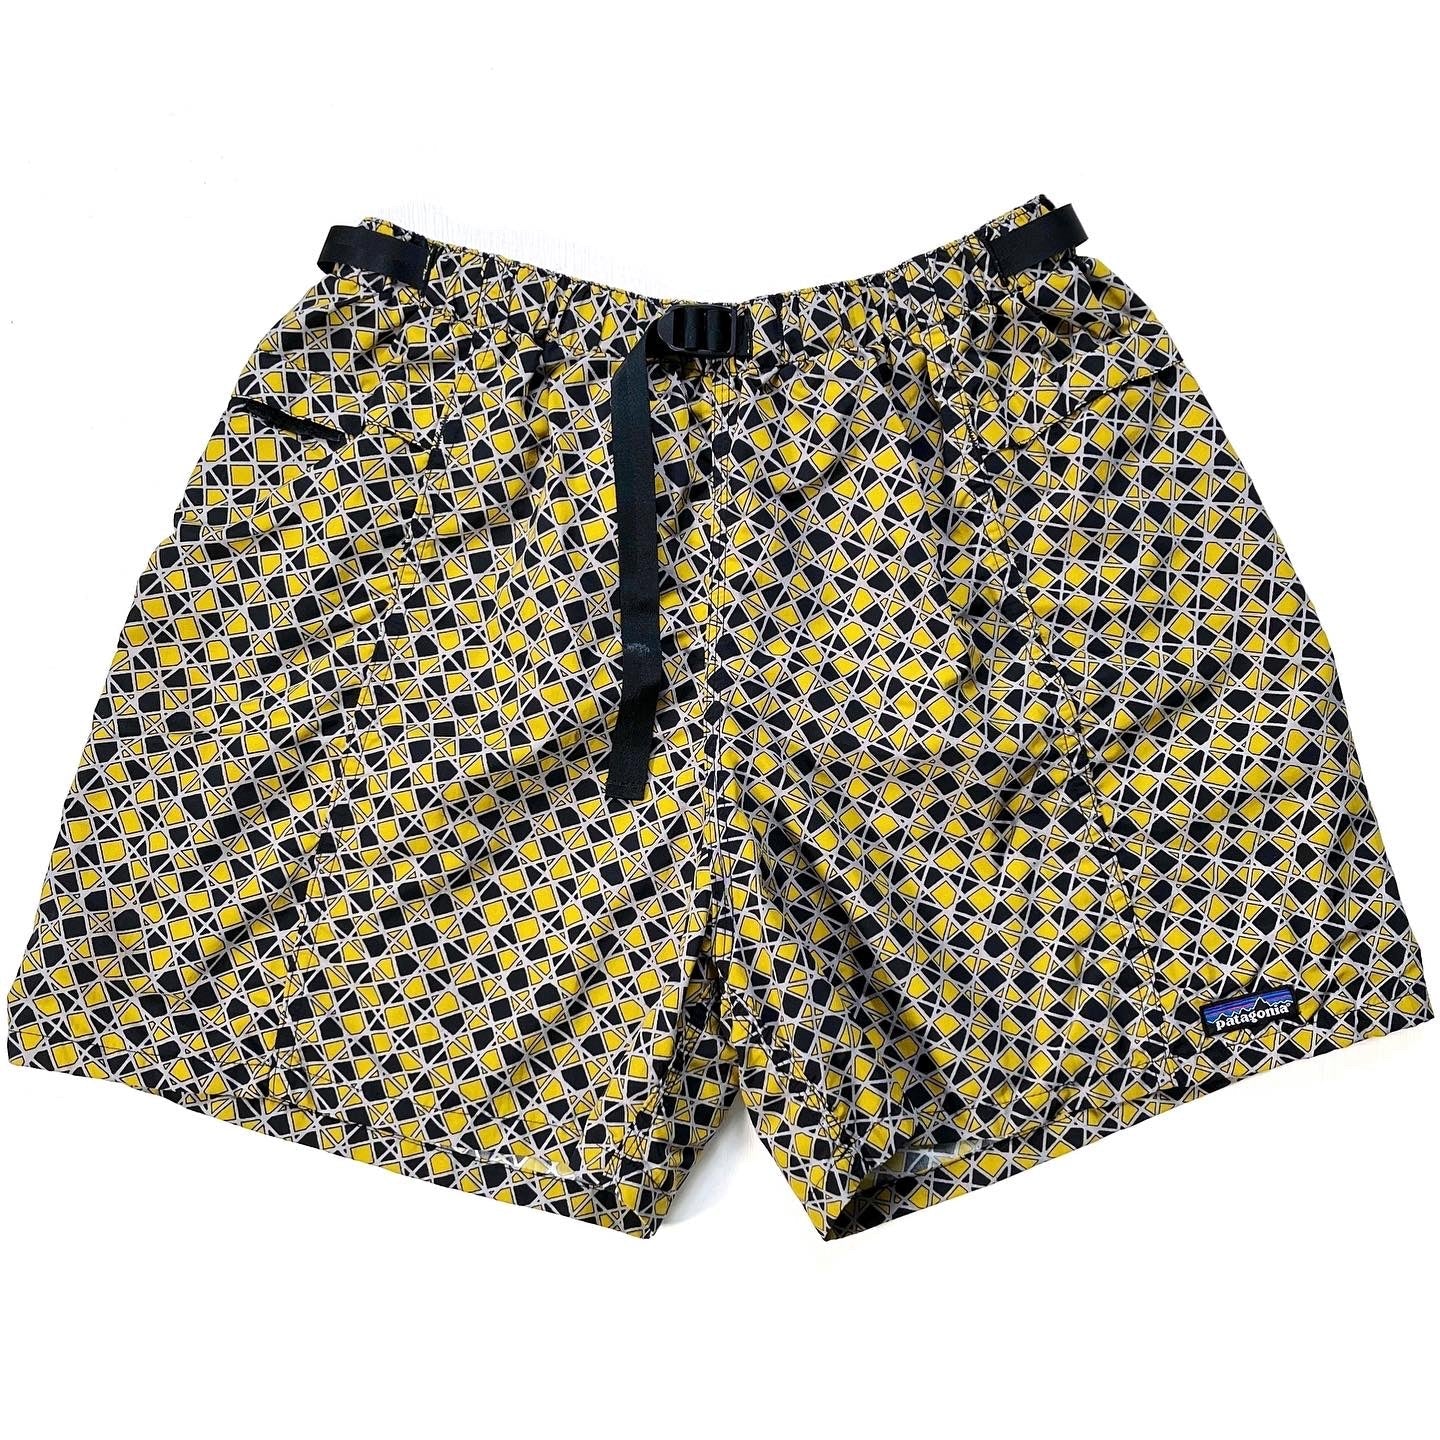 pleated wave pattern shorts